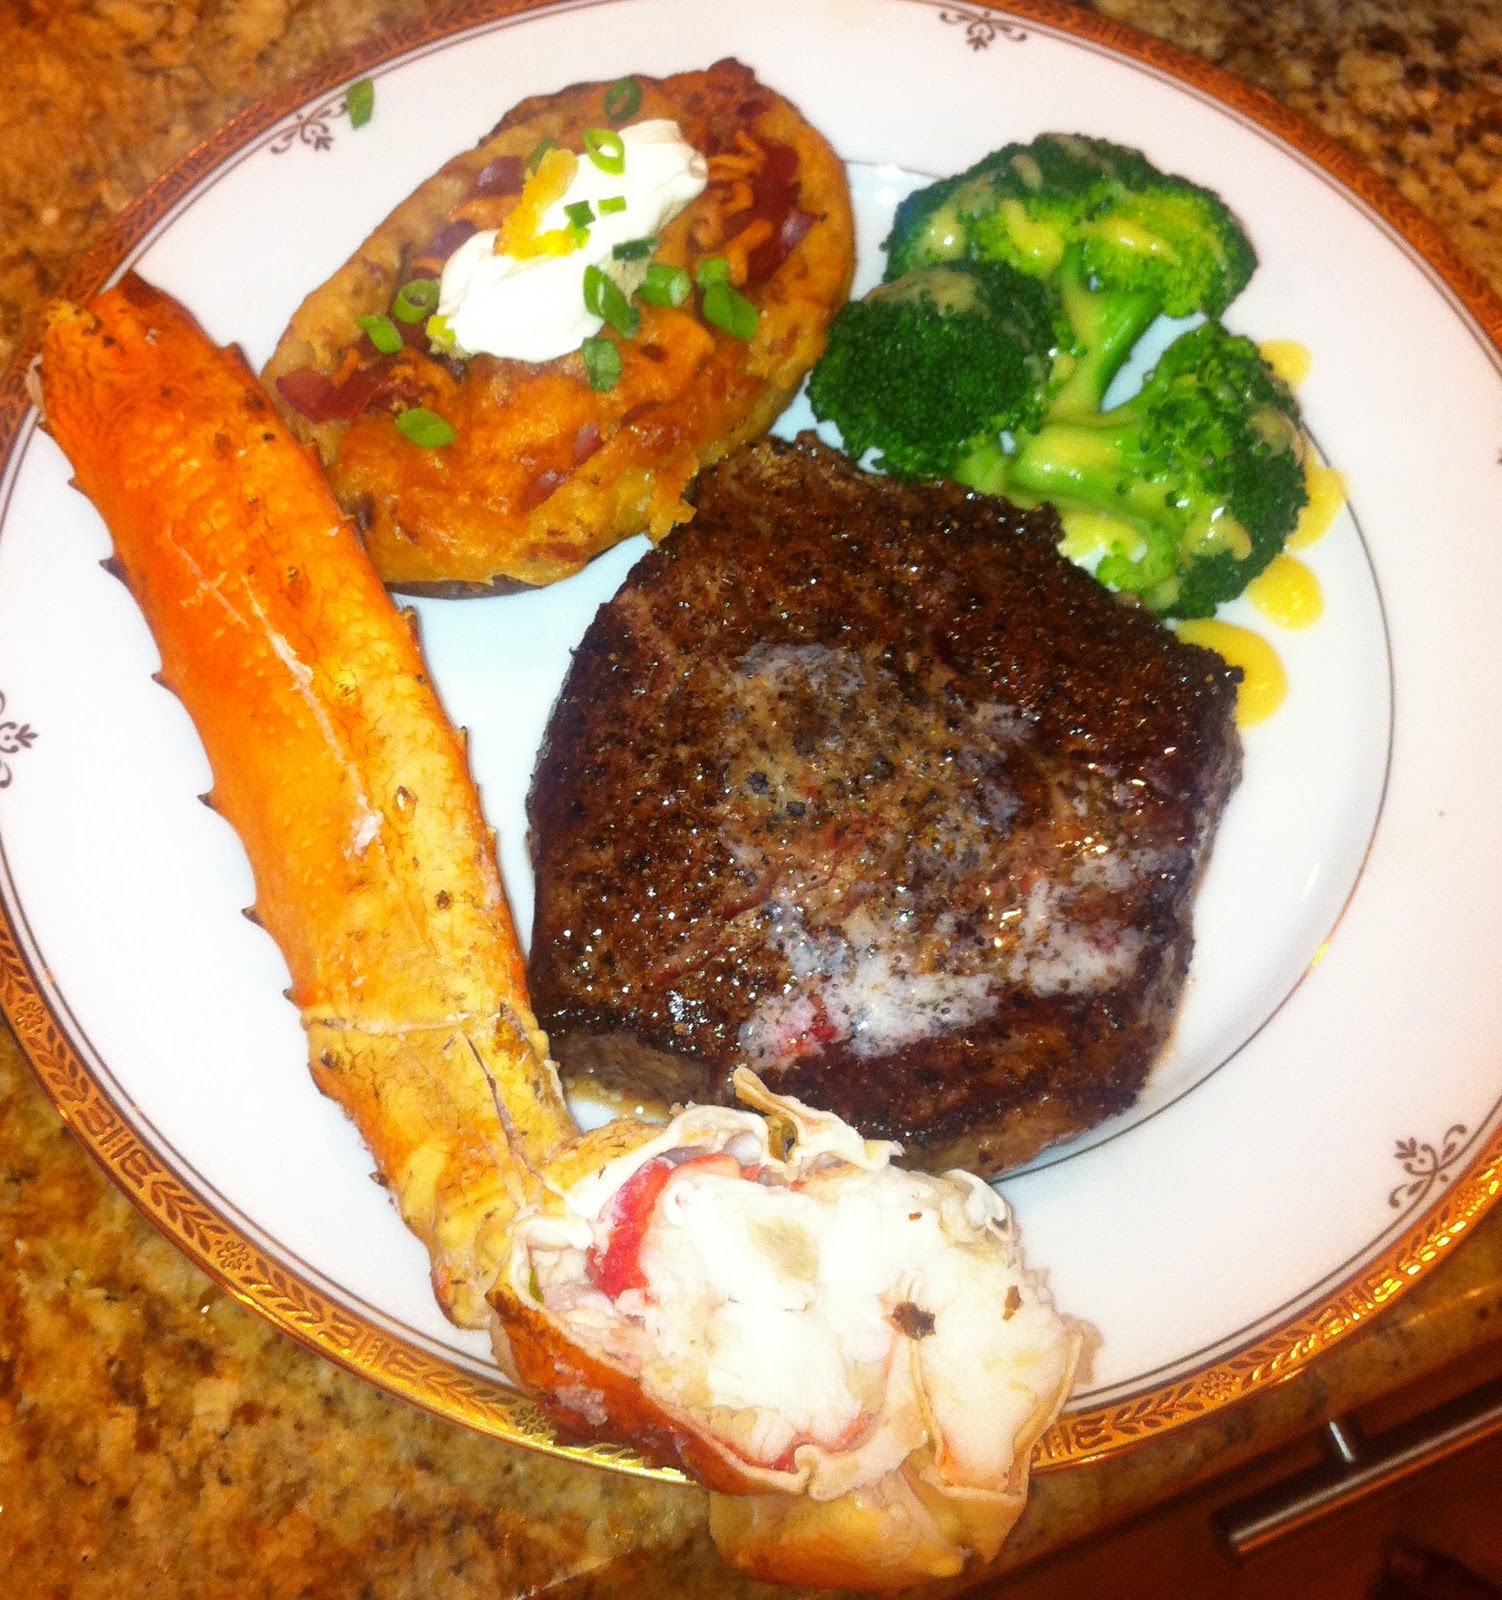 GREAT EATS HAWAII: STEAK AND CRAB - DINNER AT HOME WITH FAMILY